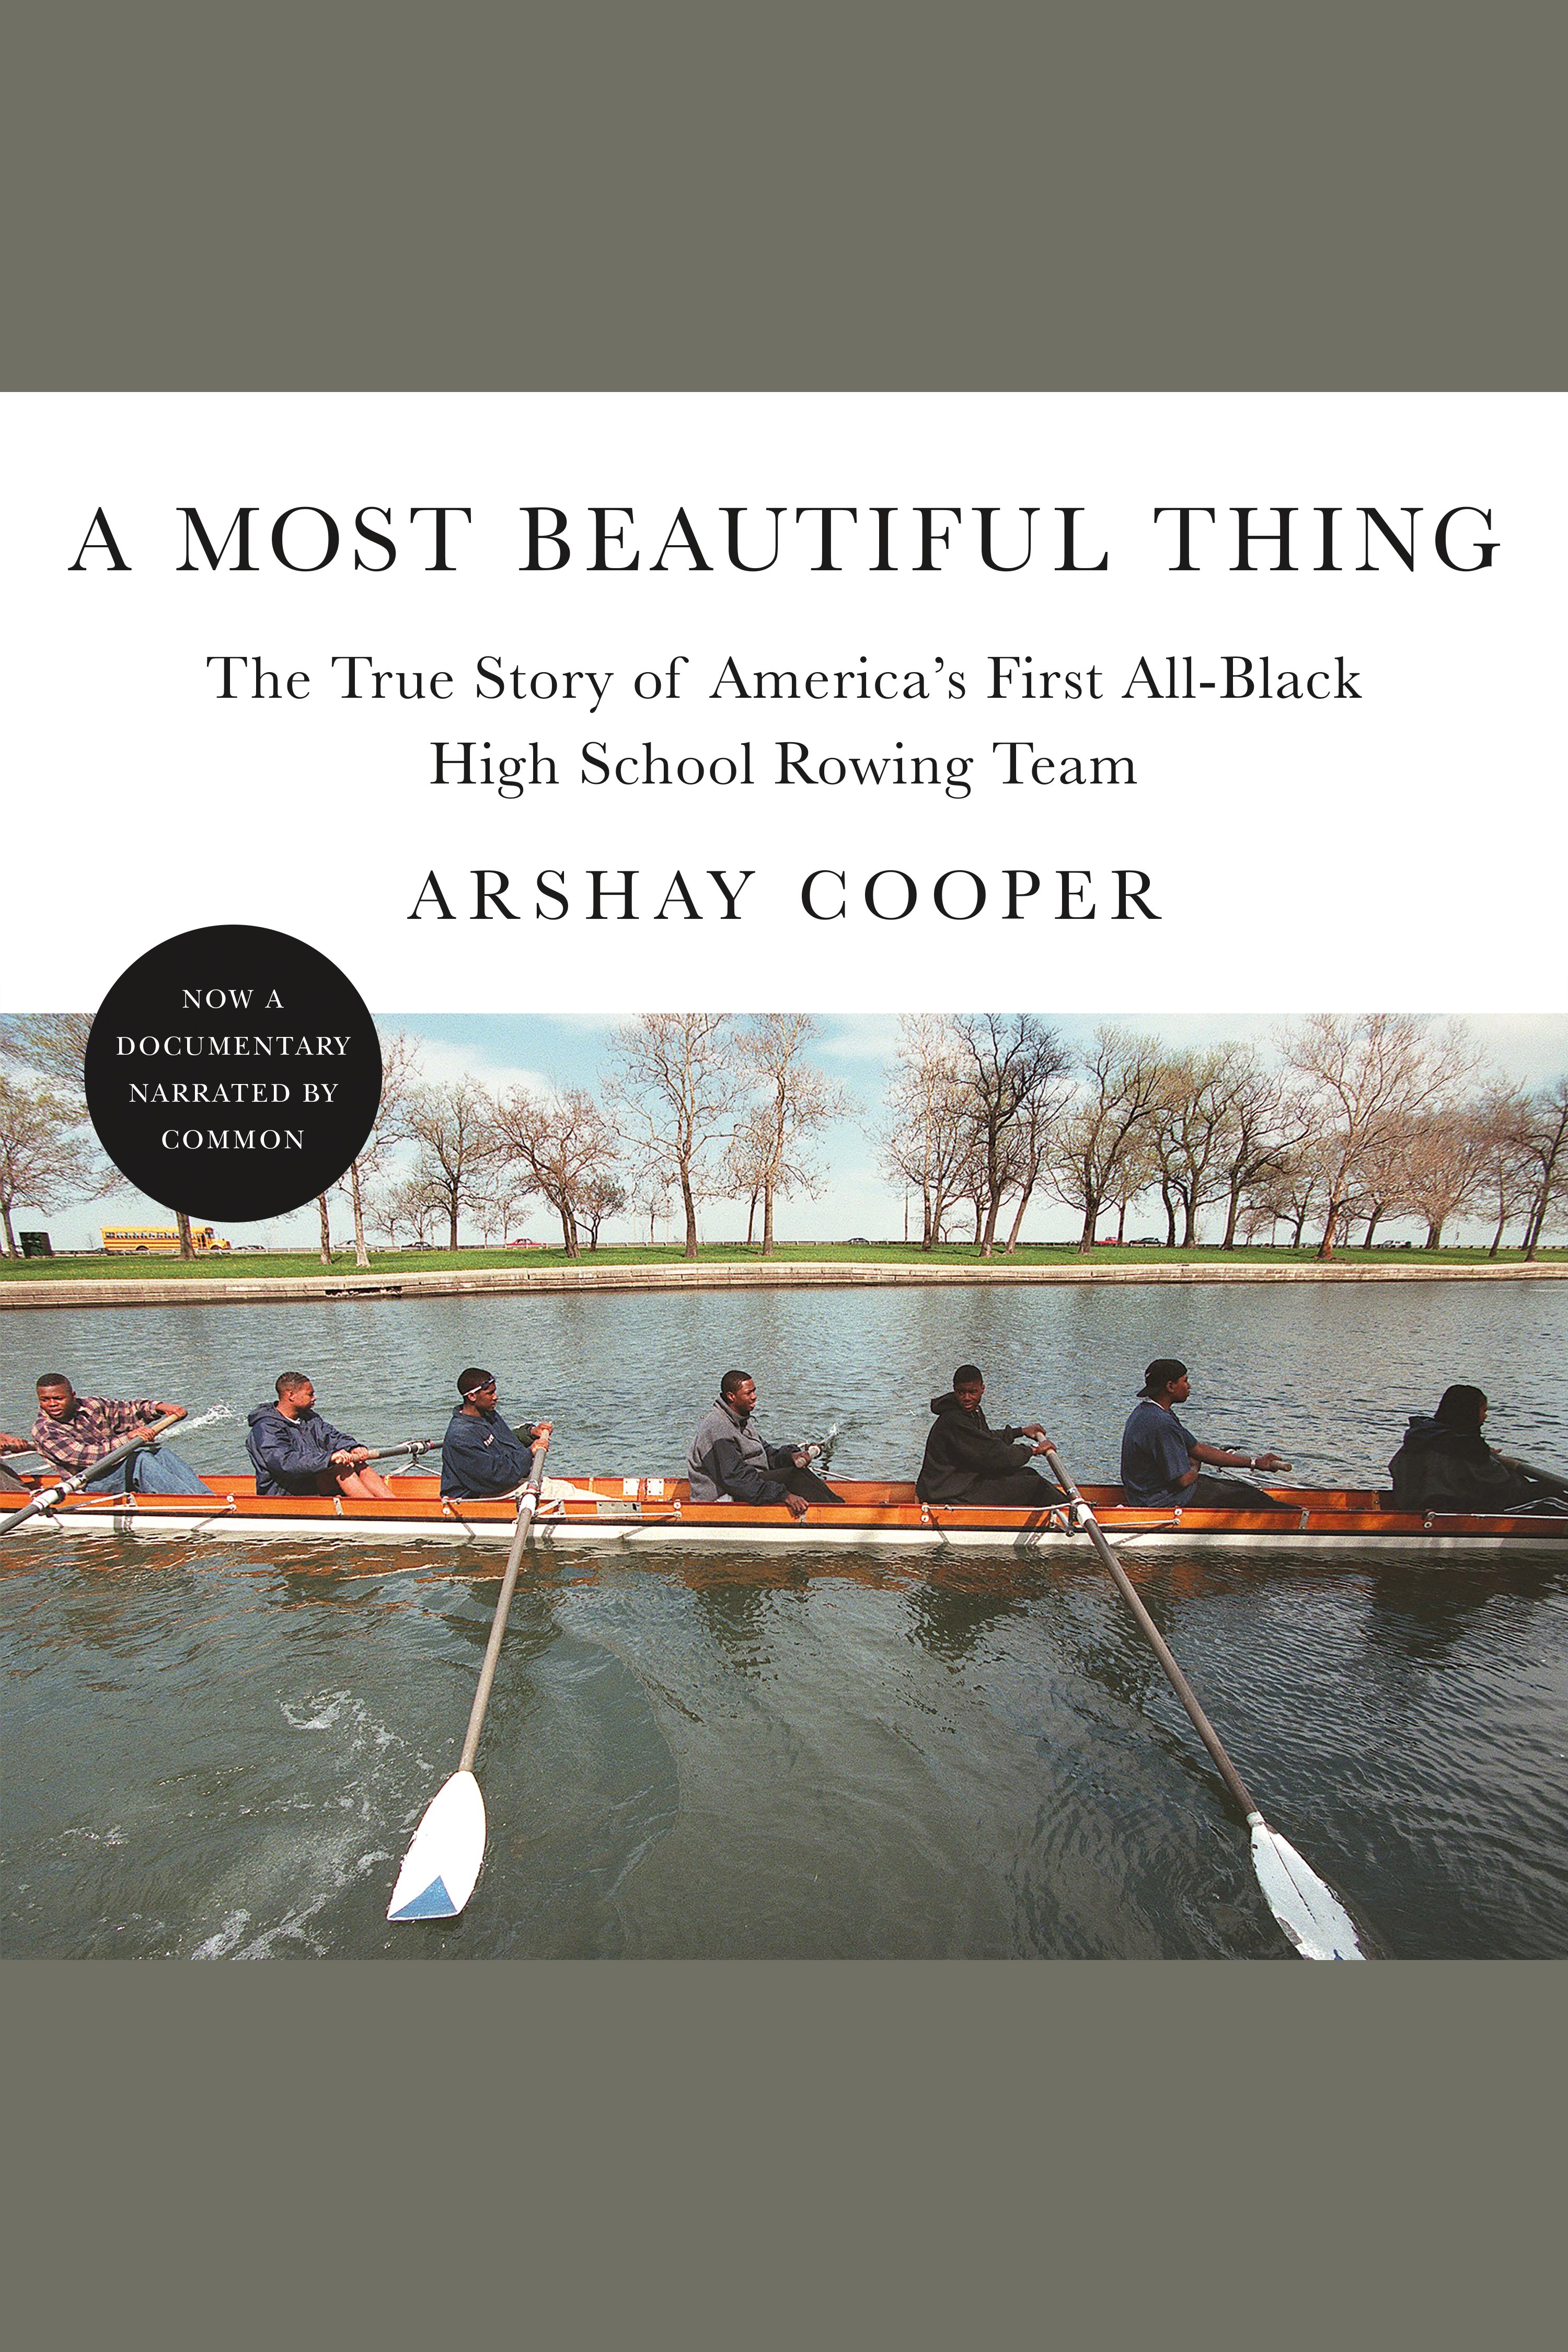 A Most Beautiful Thing The True Story of America's First All-Black High School Rowing Team cover image